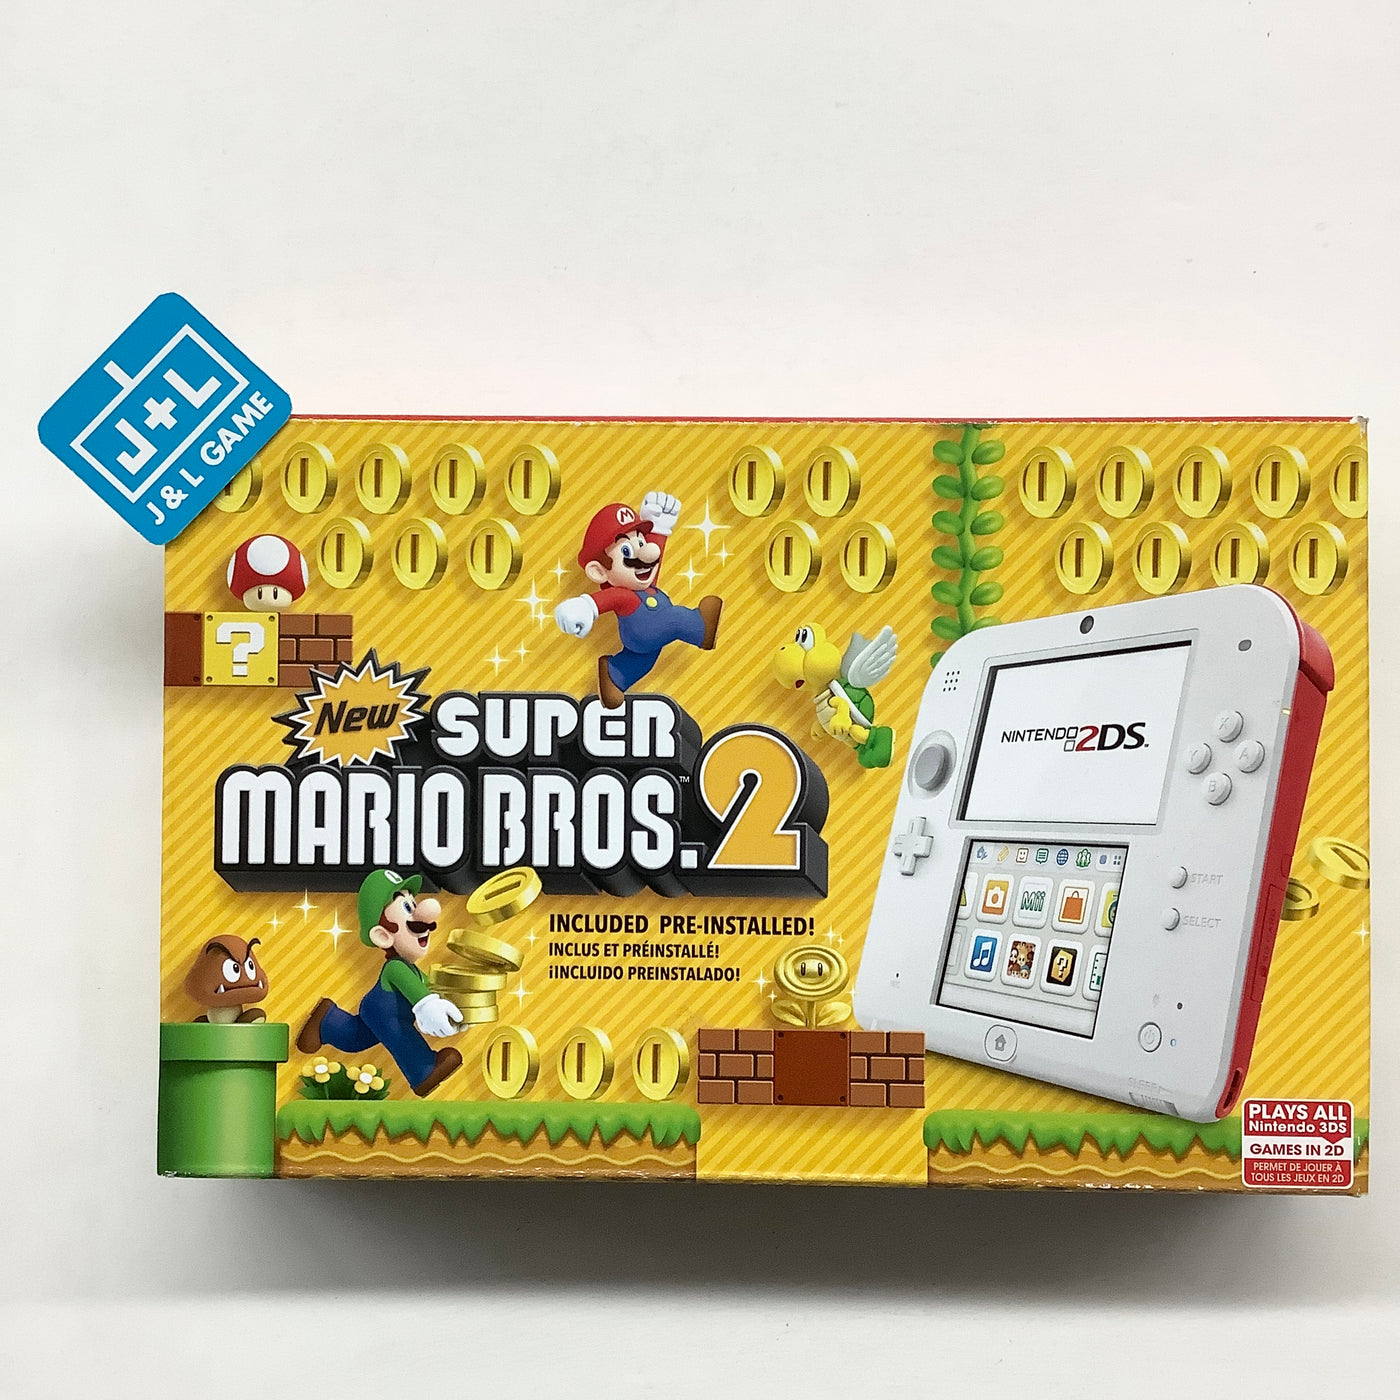 2 New with J&L (Game Console Game Super 2DS Bros. Mario Nintendo (Scarlet | Red)